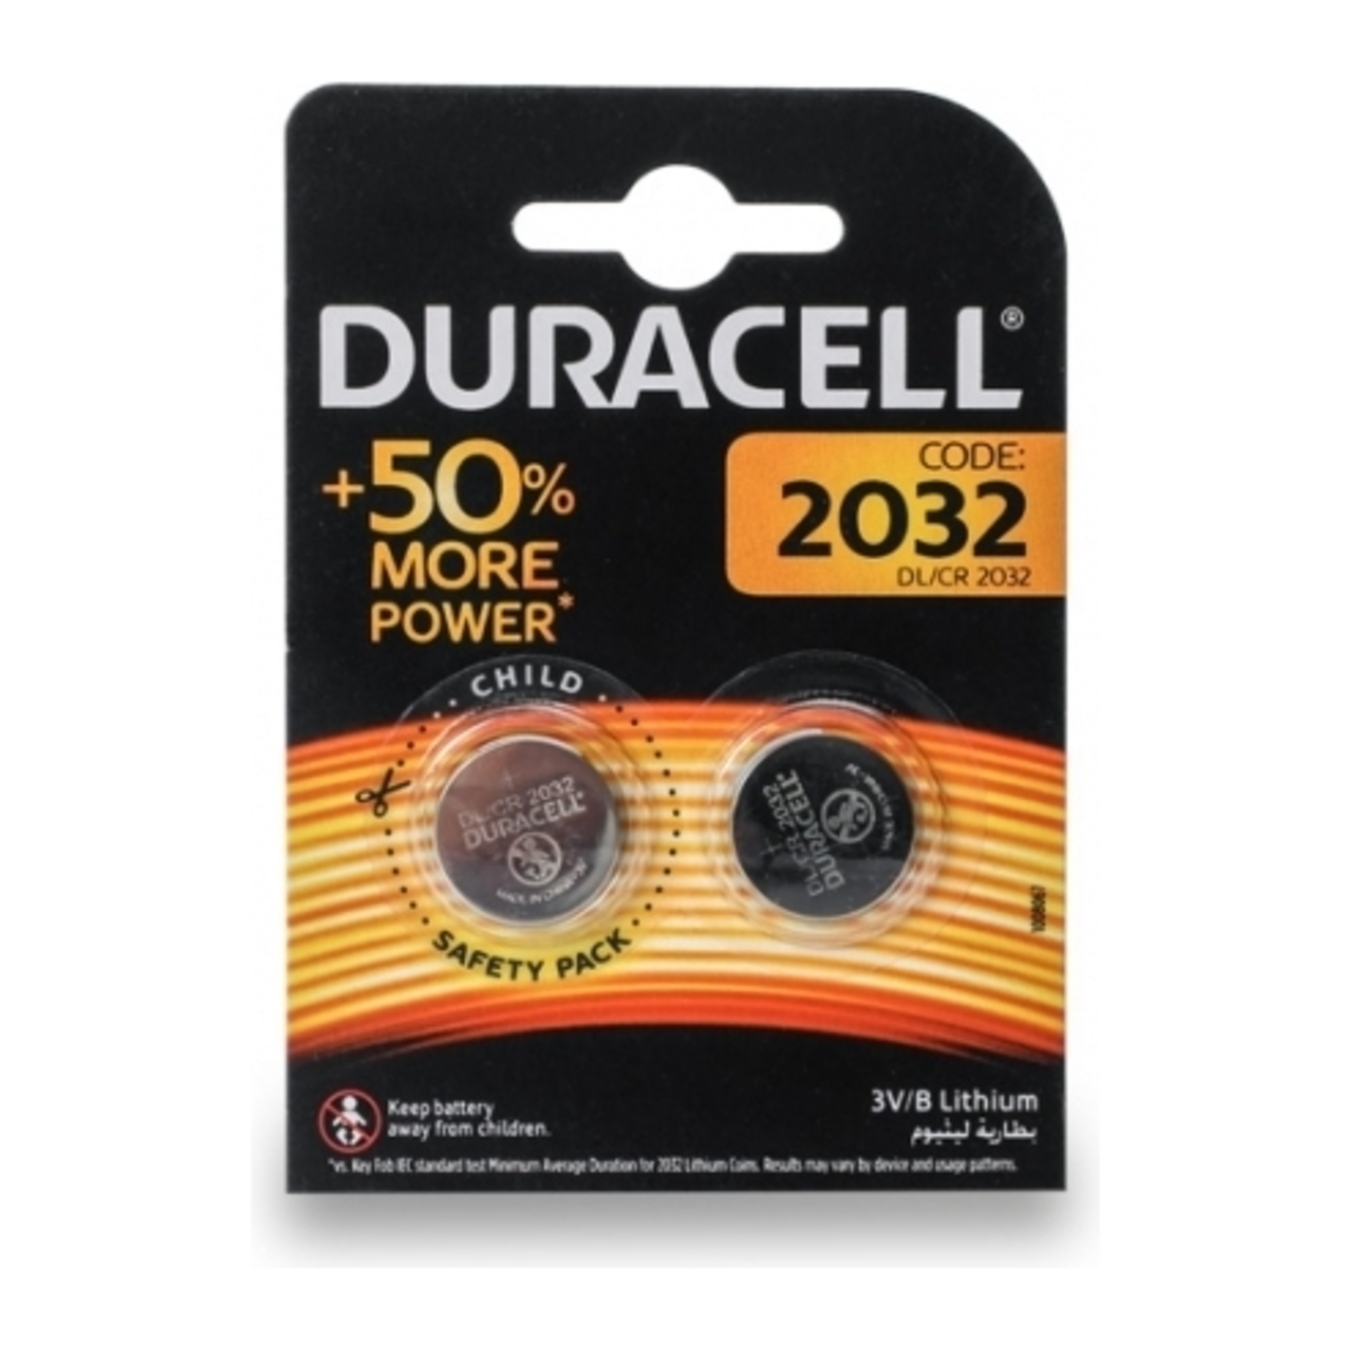 Duracell 3V 2032 Battery 2 pieces